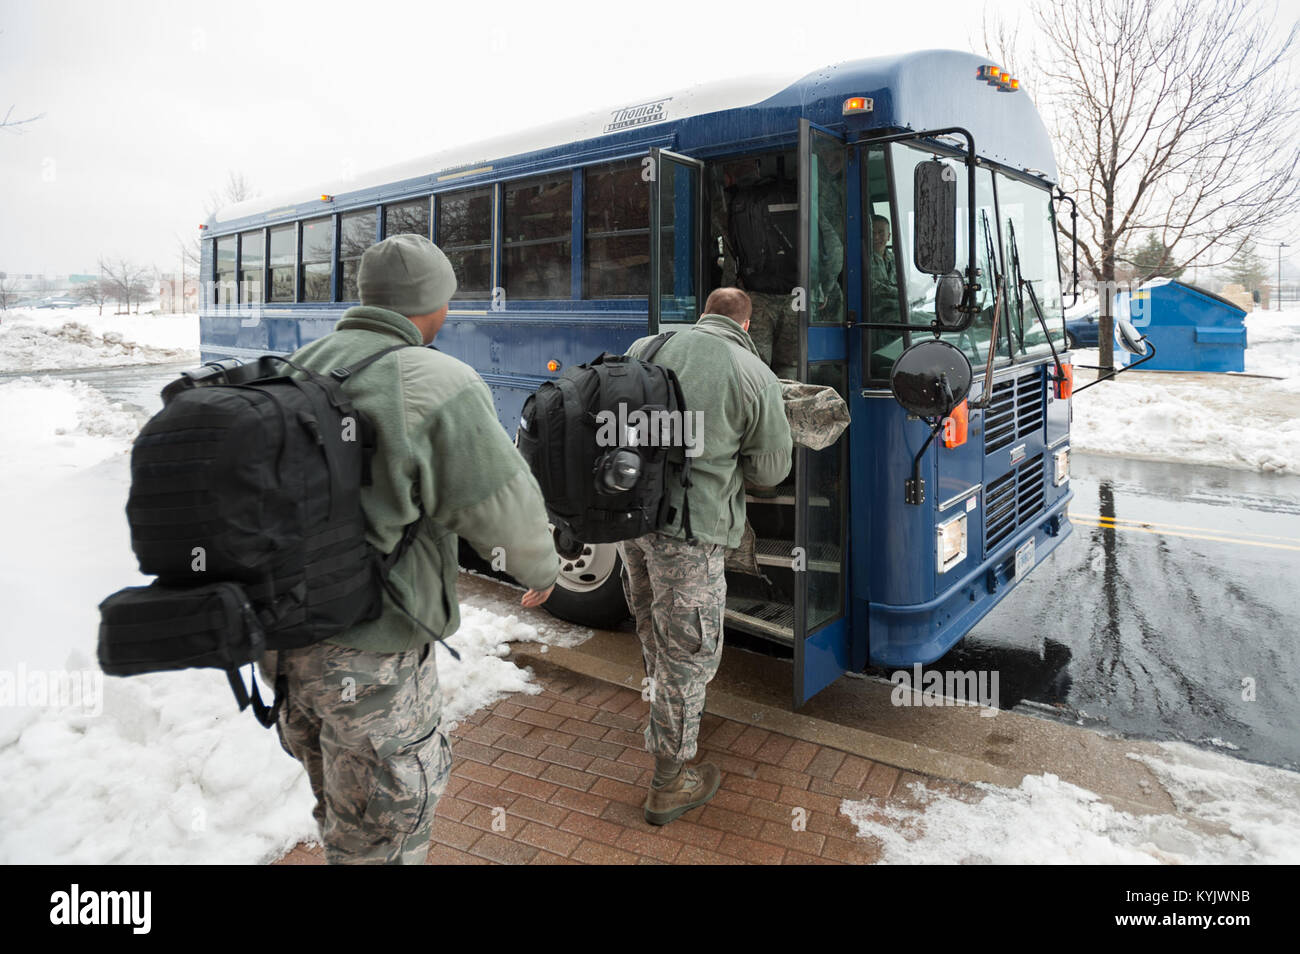 Members of the 123rd Airlift Wing board a bus that will take them to their C-130 Hercules aircraft at the Kentucky Air National Guard Base in Louisville, Ky., Feb. 21, 2015. The Airmen are heading to the Persian Gulf for a four-month deployment in support of Operation Freedom's Sentinel. (U.S. Air National Guard photo by Maj. Dale Greer) Stock Photo